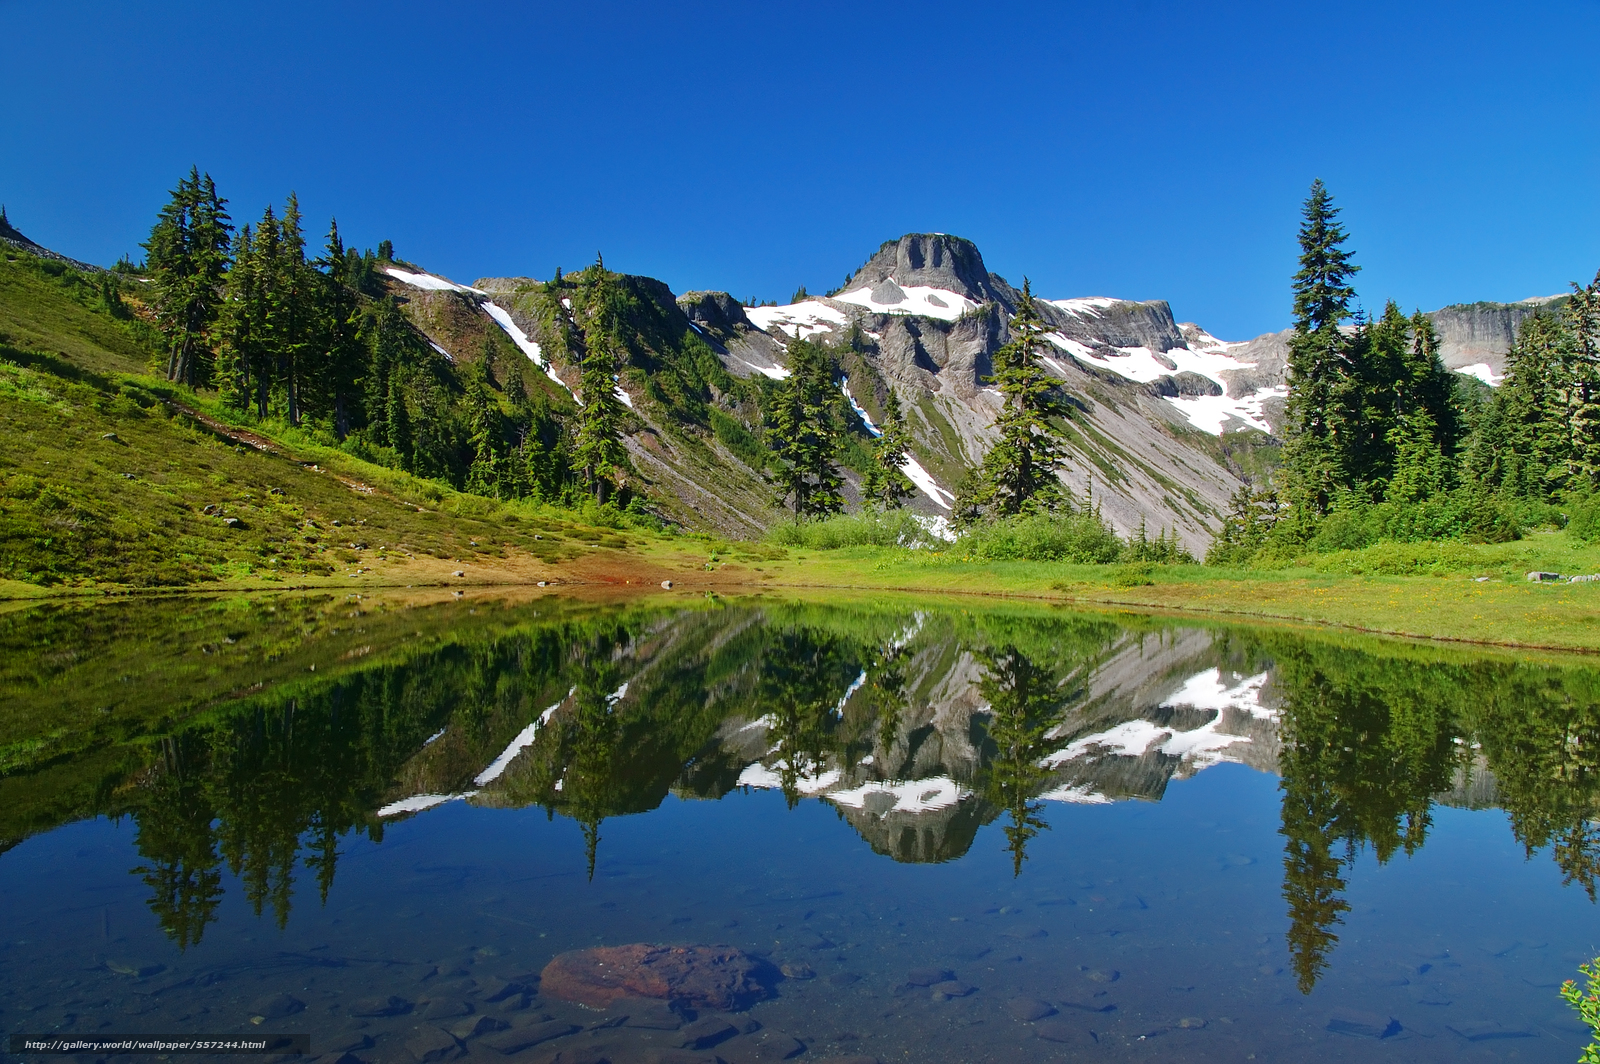 Download wallpaper lake in the North Cascades Washington State 1600x1064